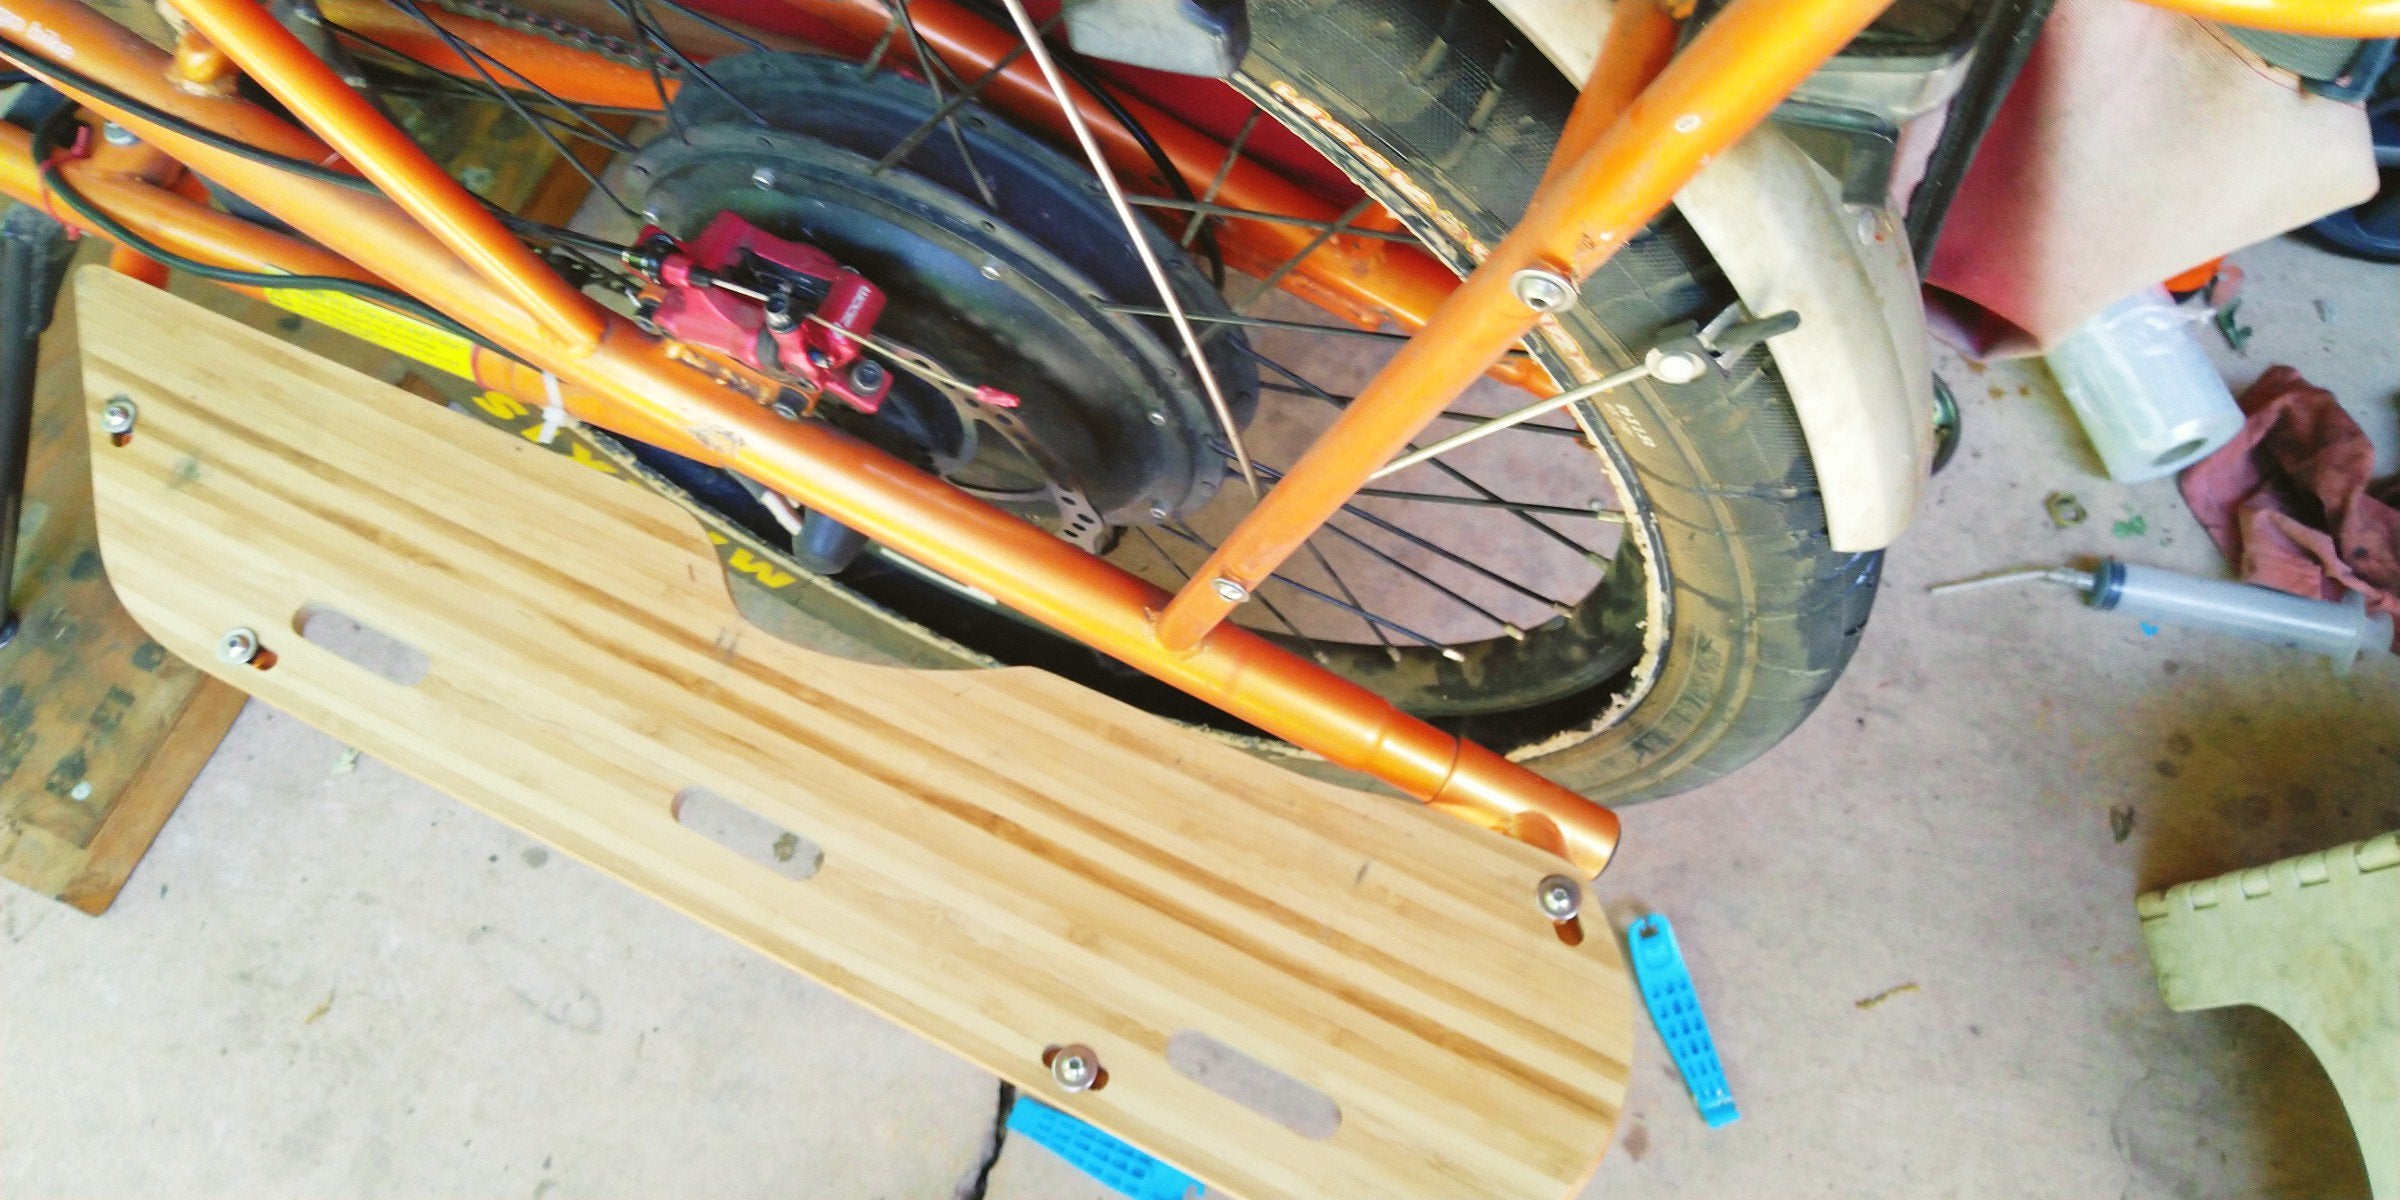 It’s not stupid if it works: Tubeless hack